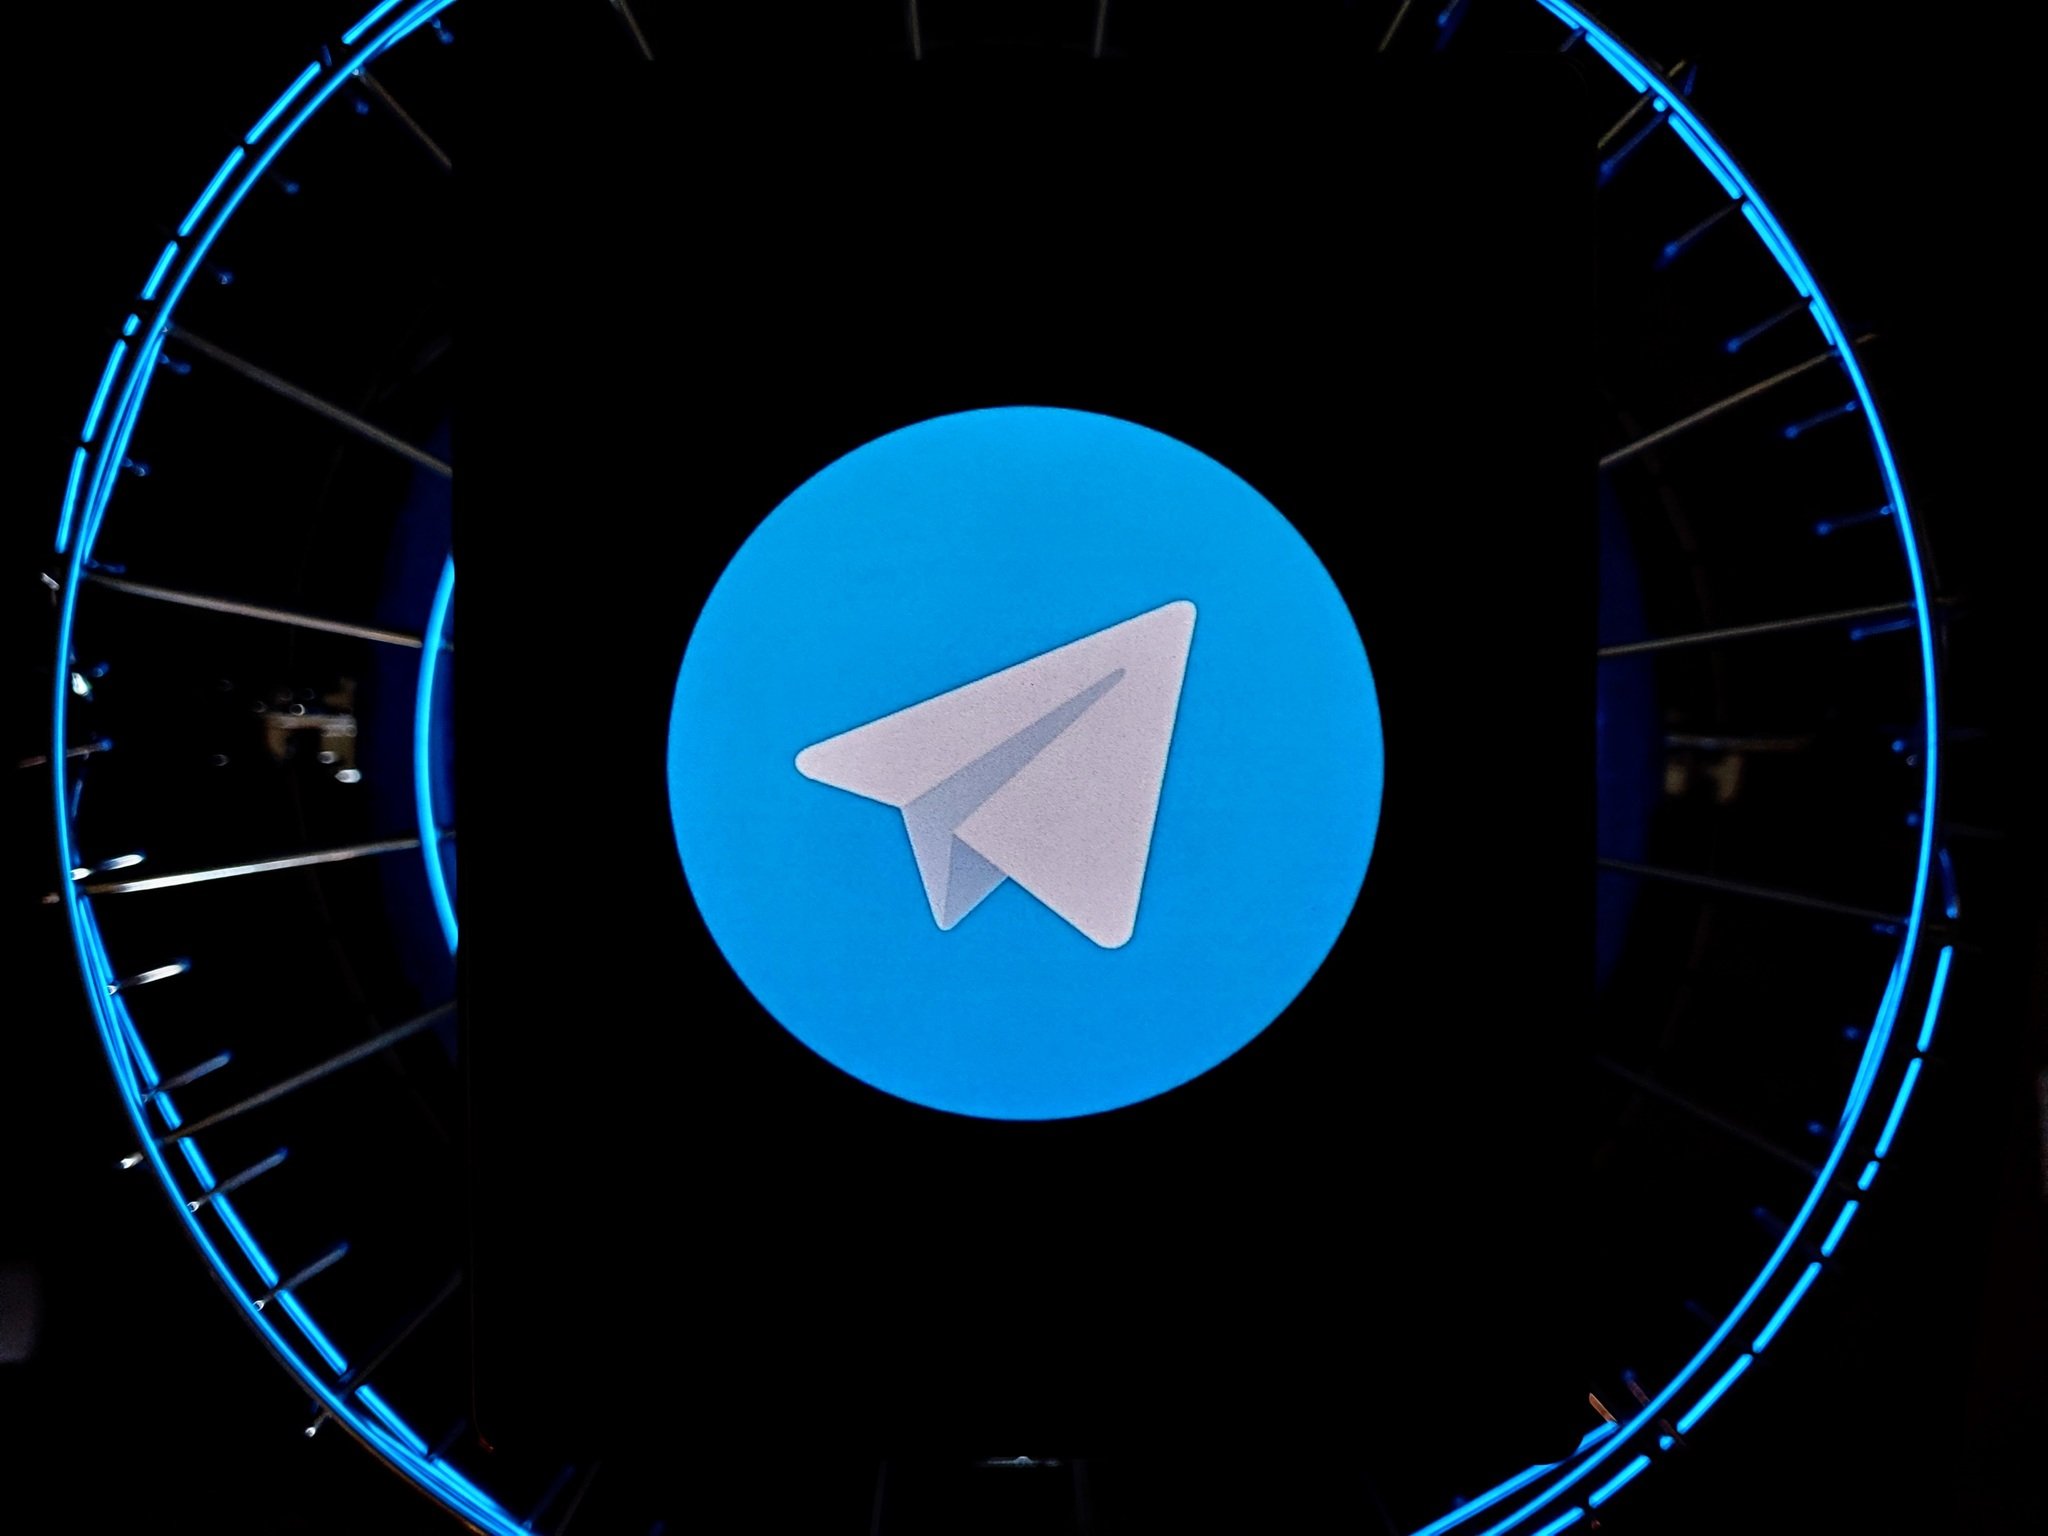 pin-messages-in-telegram-chats-with-this-quick-guide